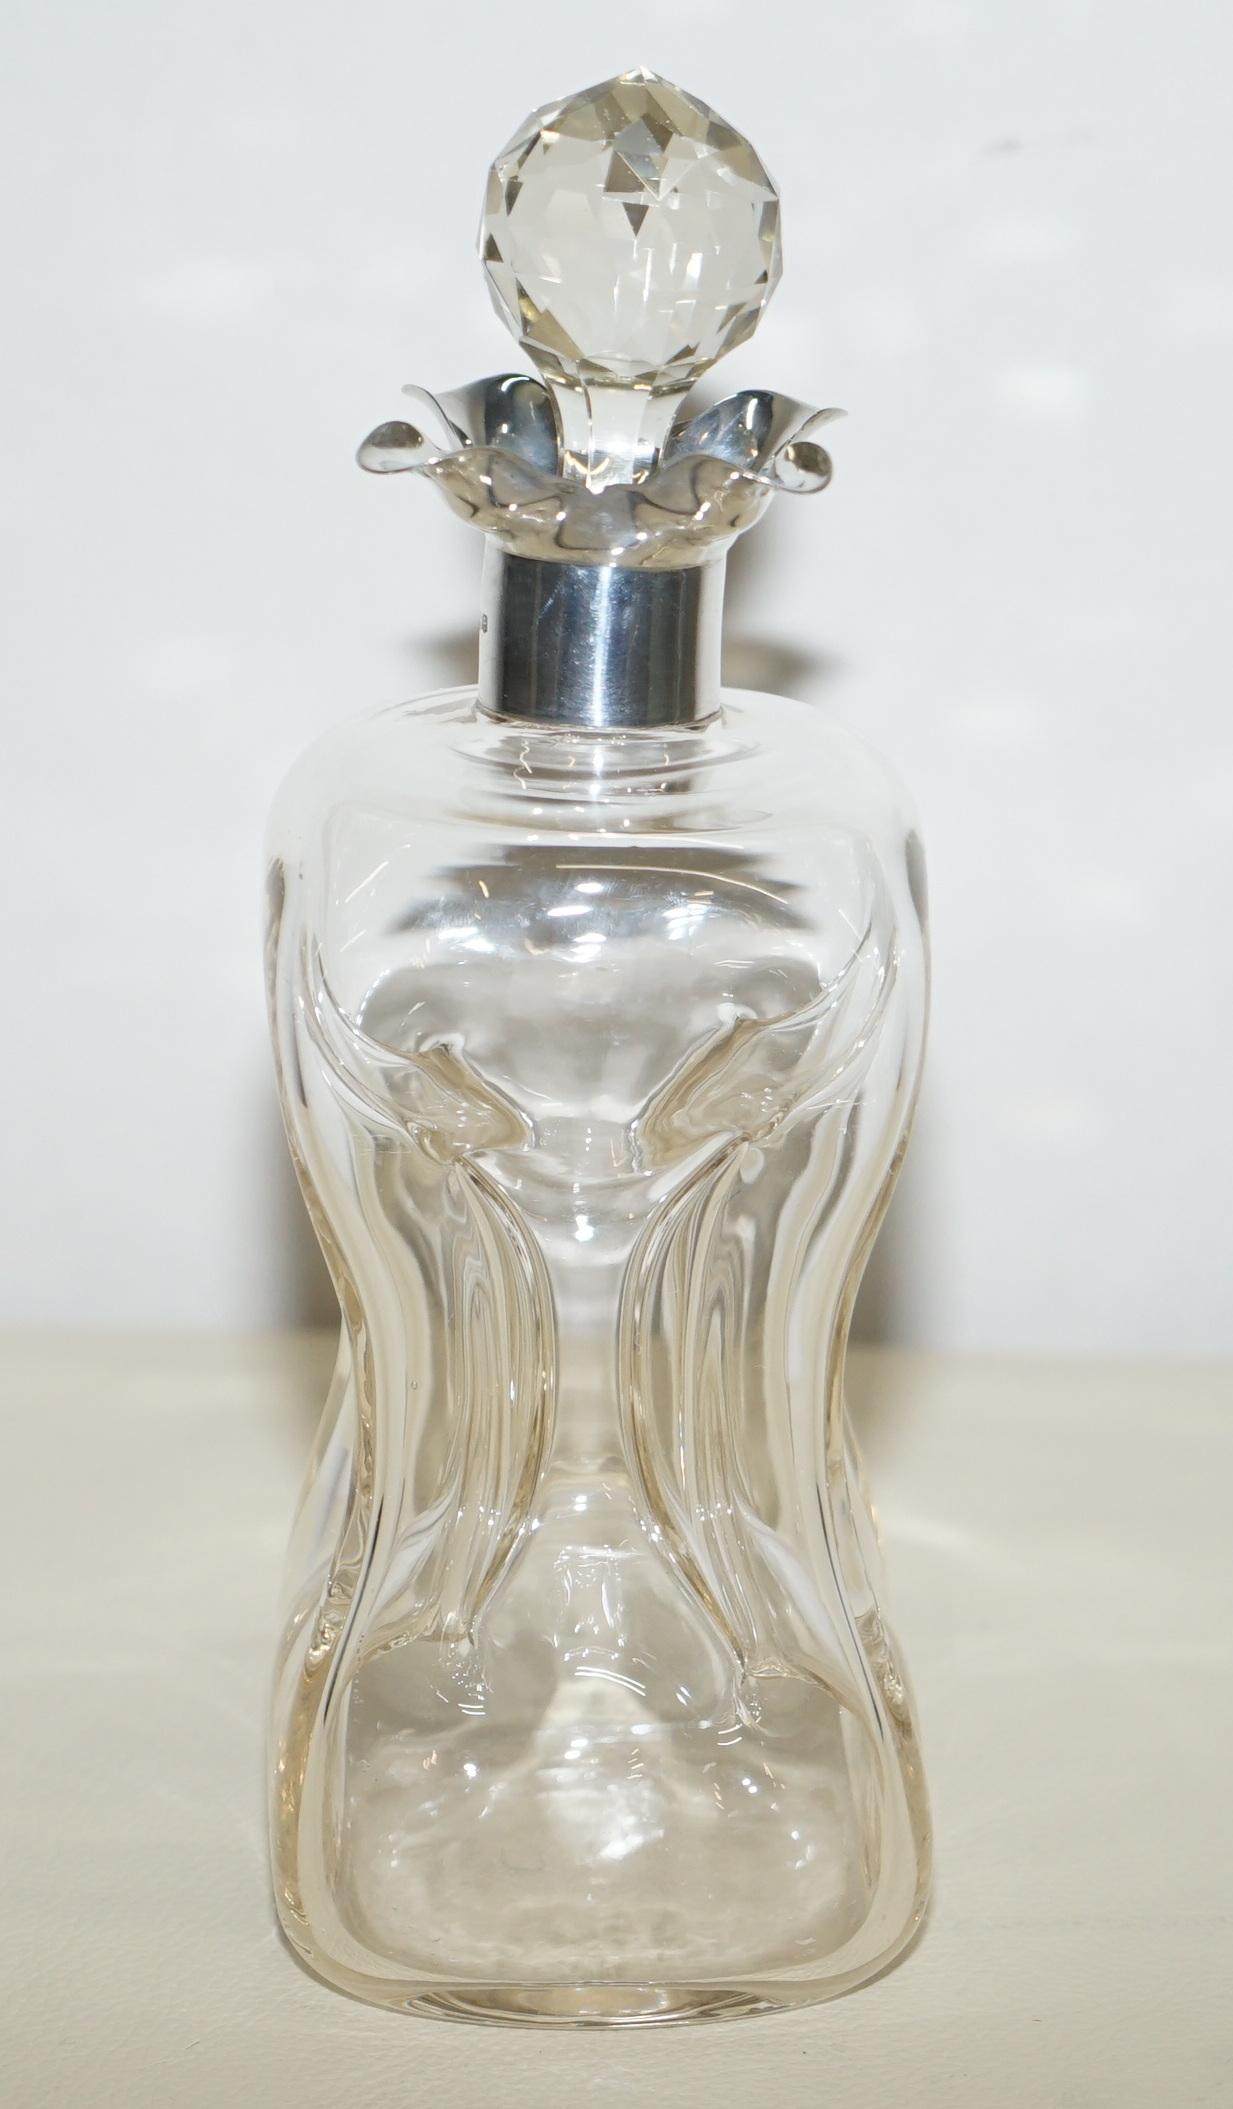 Hand-Carved Lovely Antique Sterling Silver Collar 1922 Pinch Decanter Jug for Whisky Port